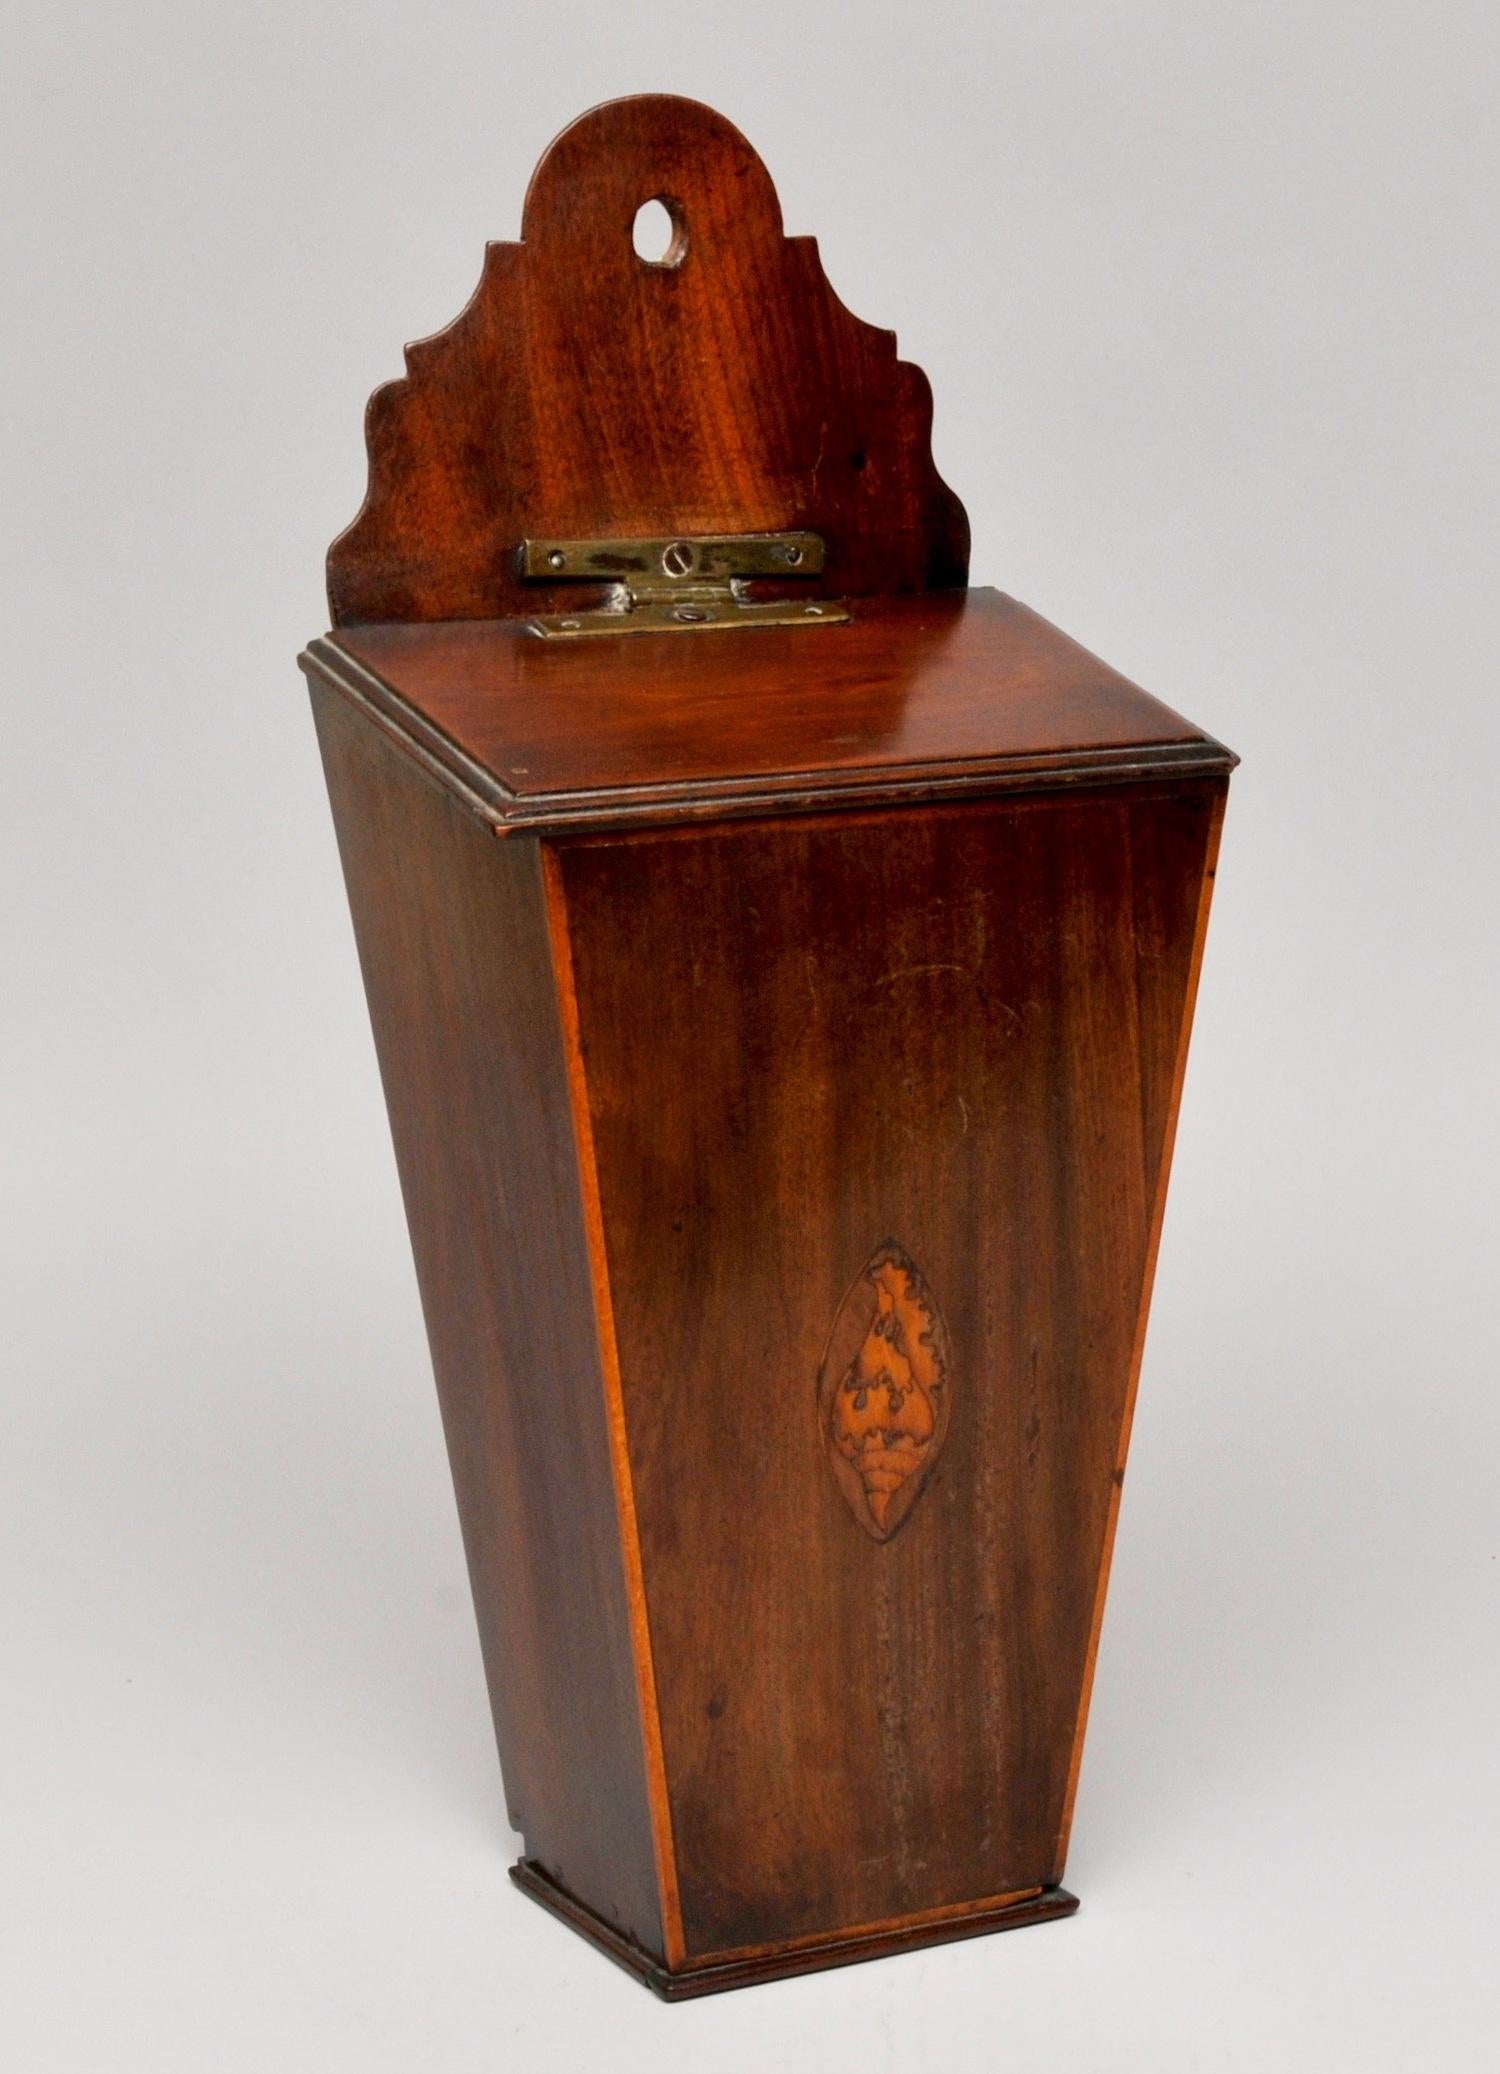 Candle box, circa 1790

Measures: H 46cm, W 21cm, D 14cm 

An interesting mahogany candle box with shell inlay detail on the front and lovely brass hinge. In excellent condition and beautiful color.